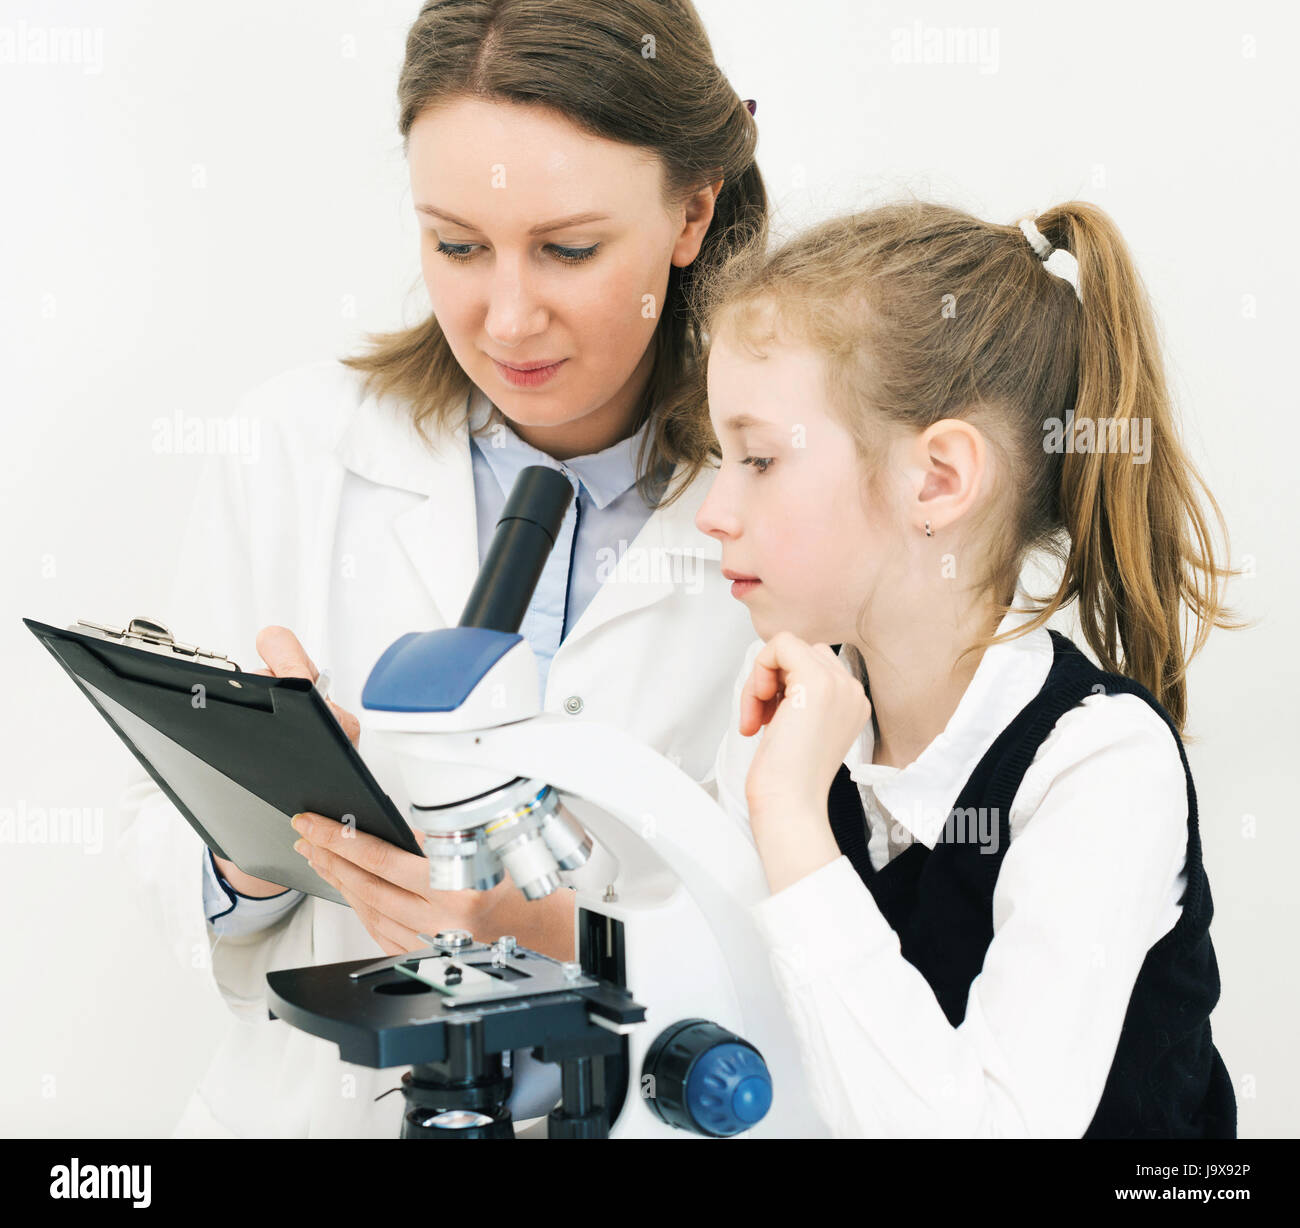 Femme et petite fille using microscope in laboratory. Banque D'Images